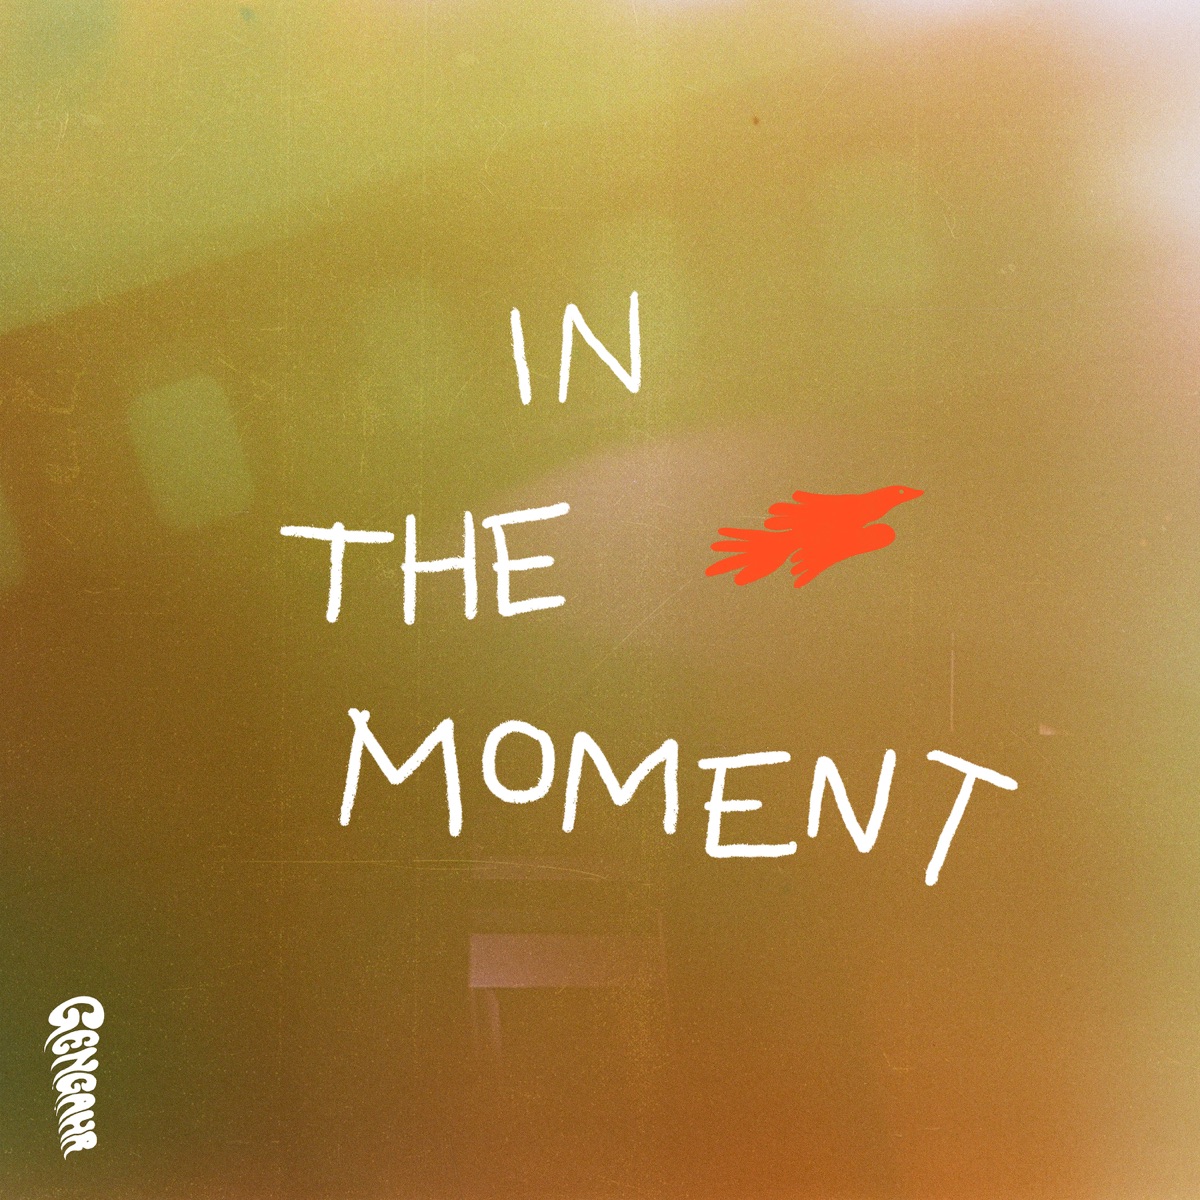 In The Moment - Single by Gengahr on Apple Music